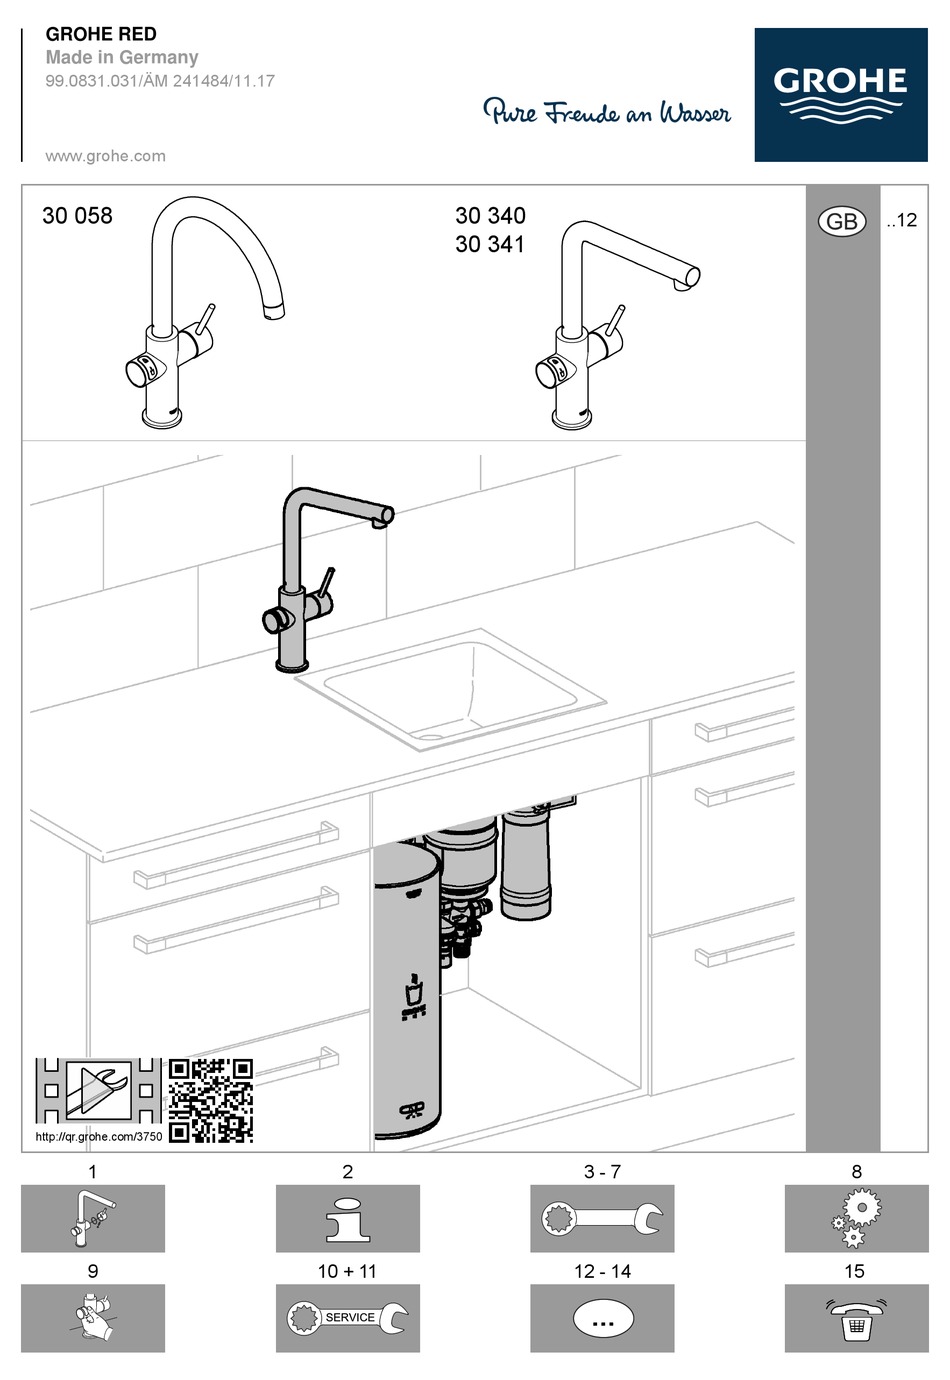 GROHE RED 30 058 MANUAL Pdf Download |